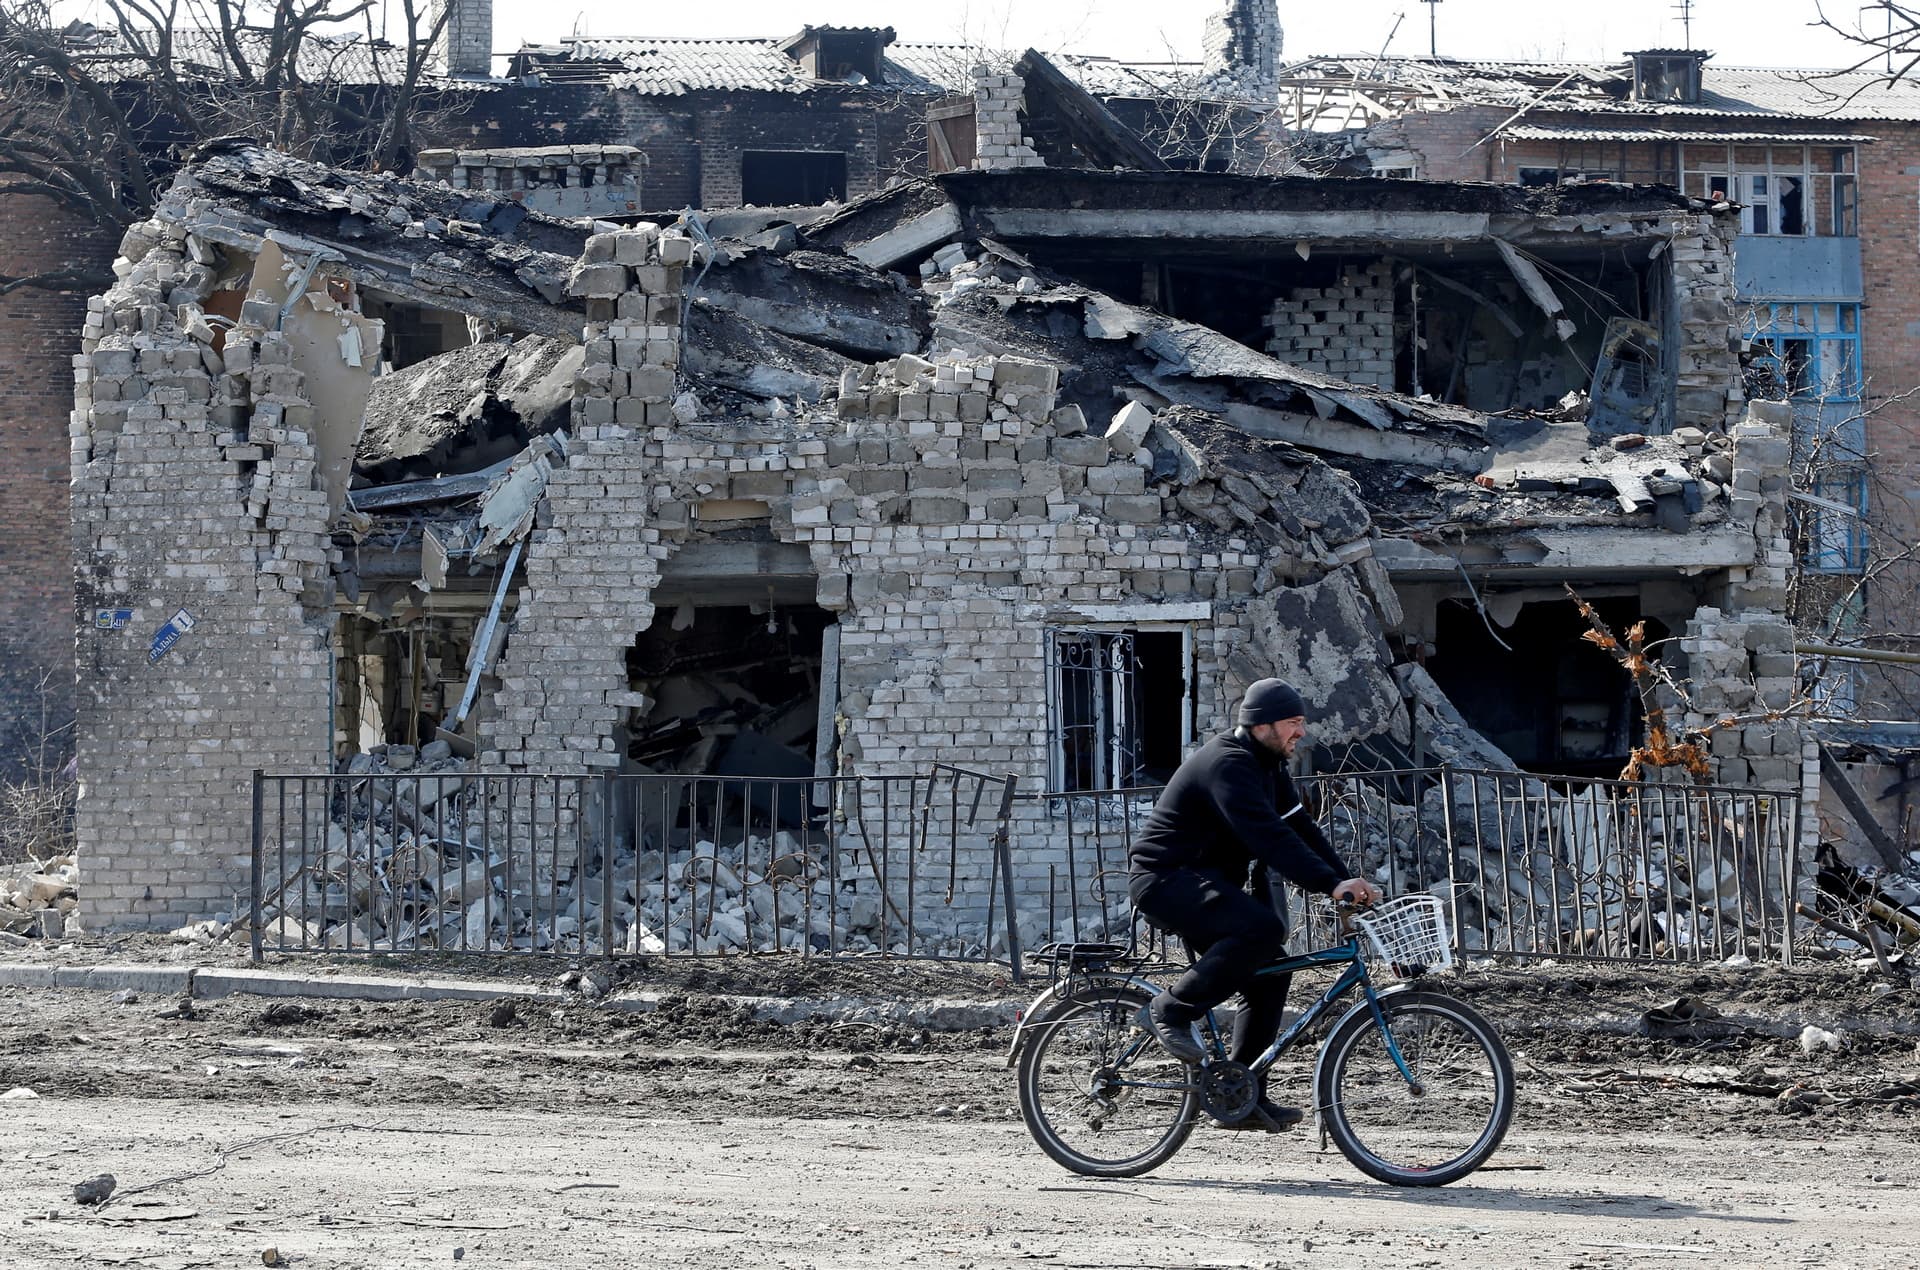 A local resident rides a bicycle past a building destroyed during Ukraine-Russia conflict in the separatist-controlled town of Volnovakha in the Donetsk region, Ukraine.